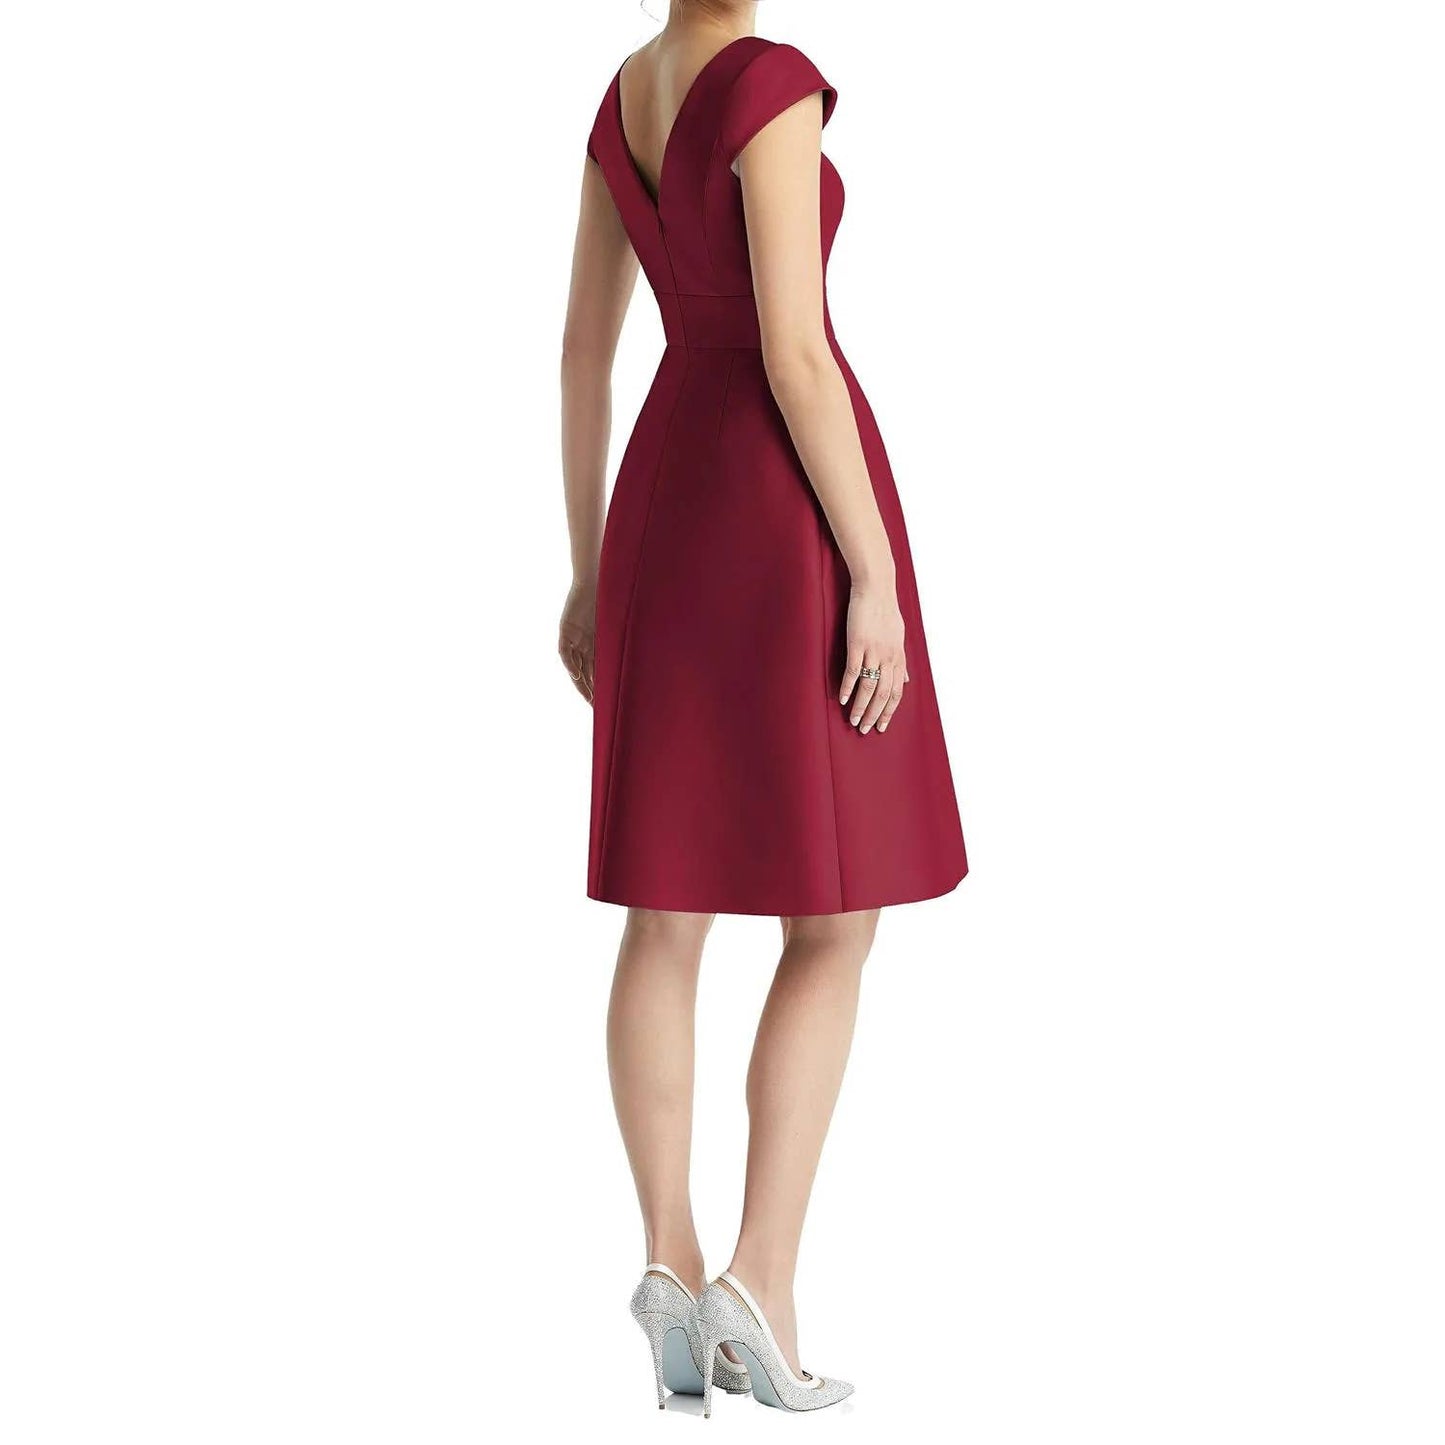 ALFRED SUNG Women's Burgundy Satin Twill Cocktail Fit & Flare Dress SZ 4